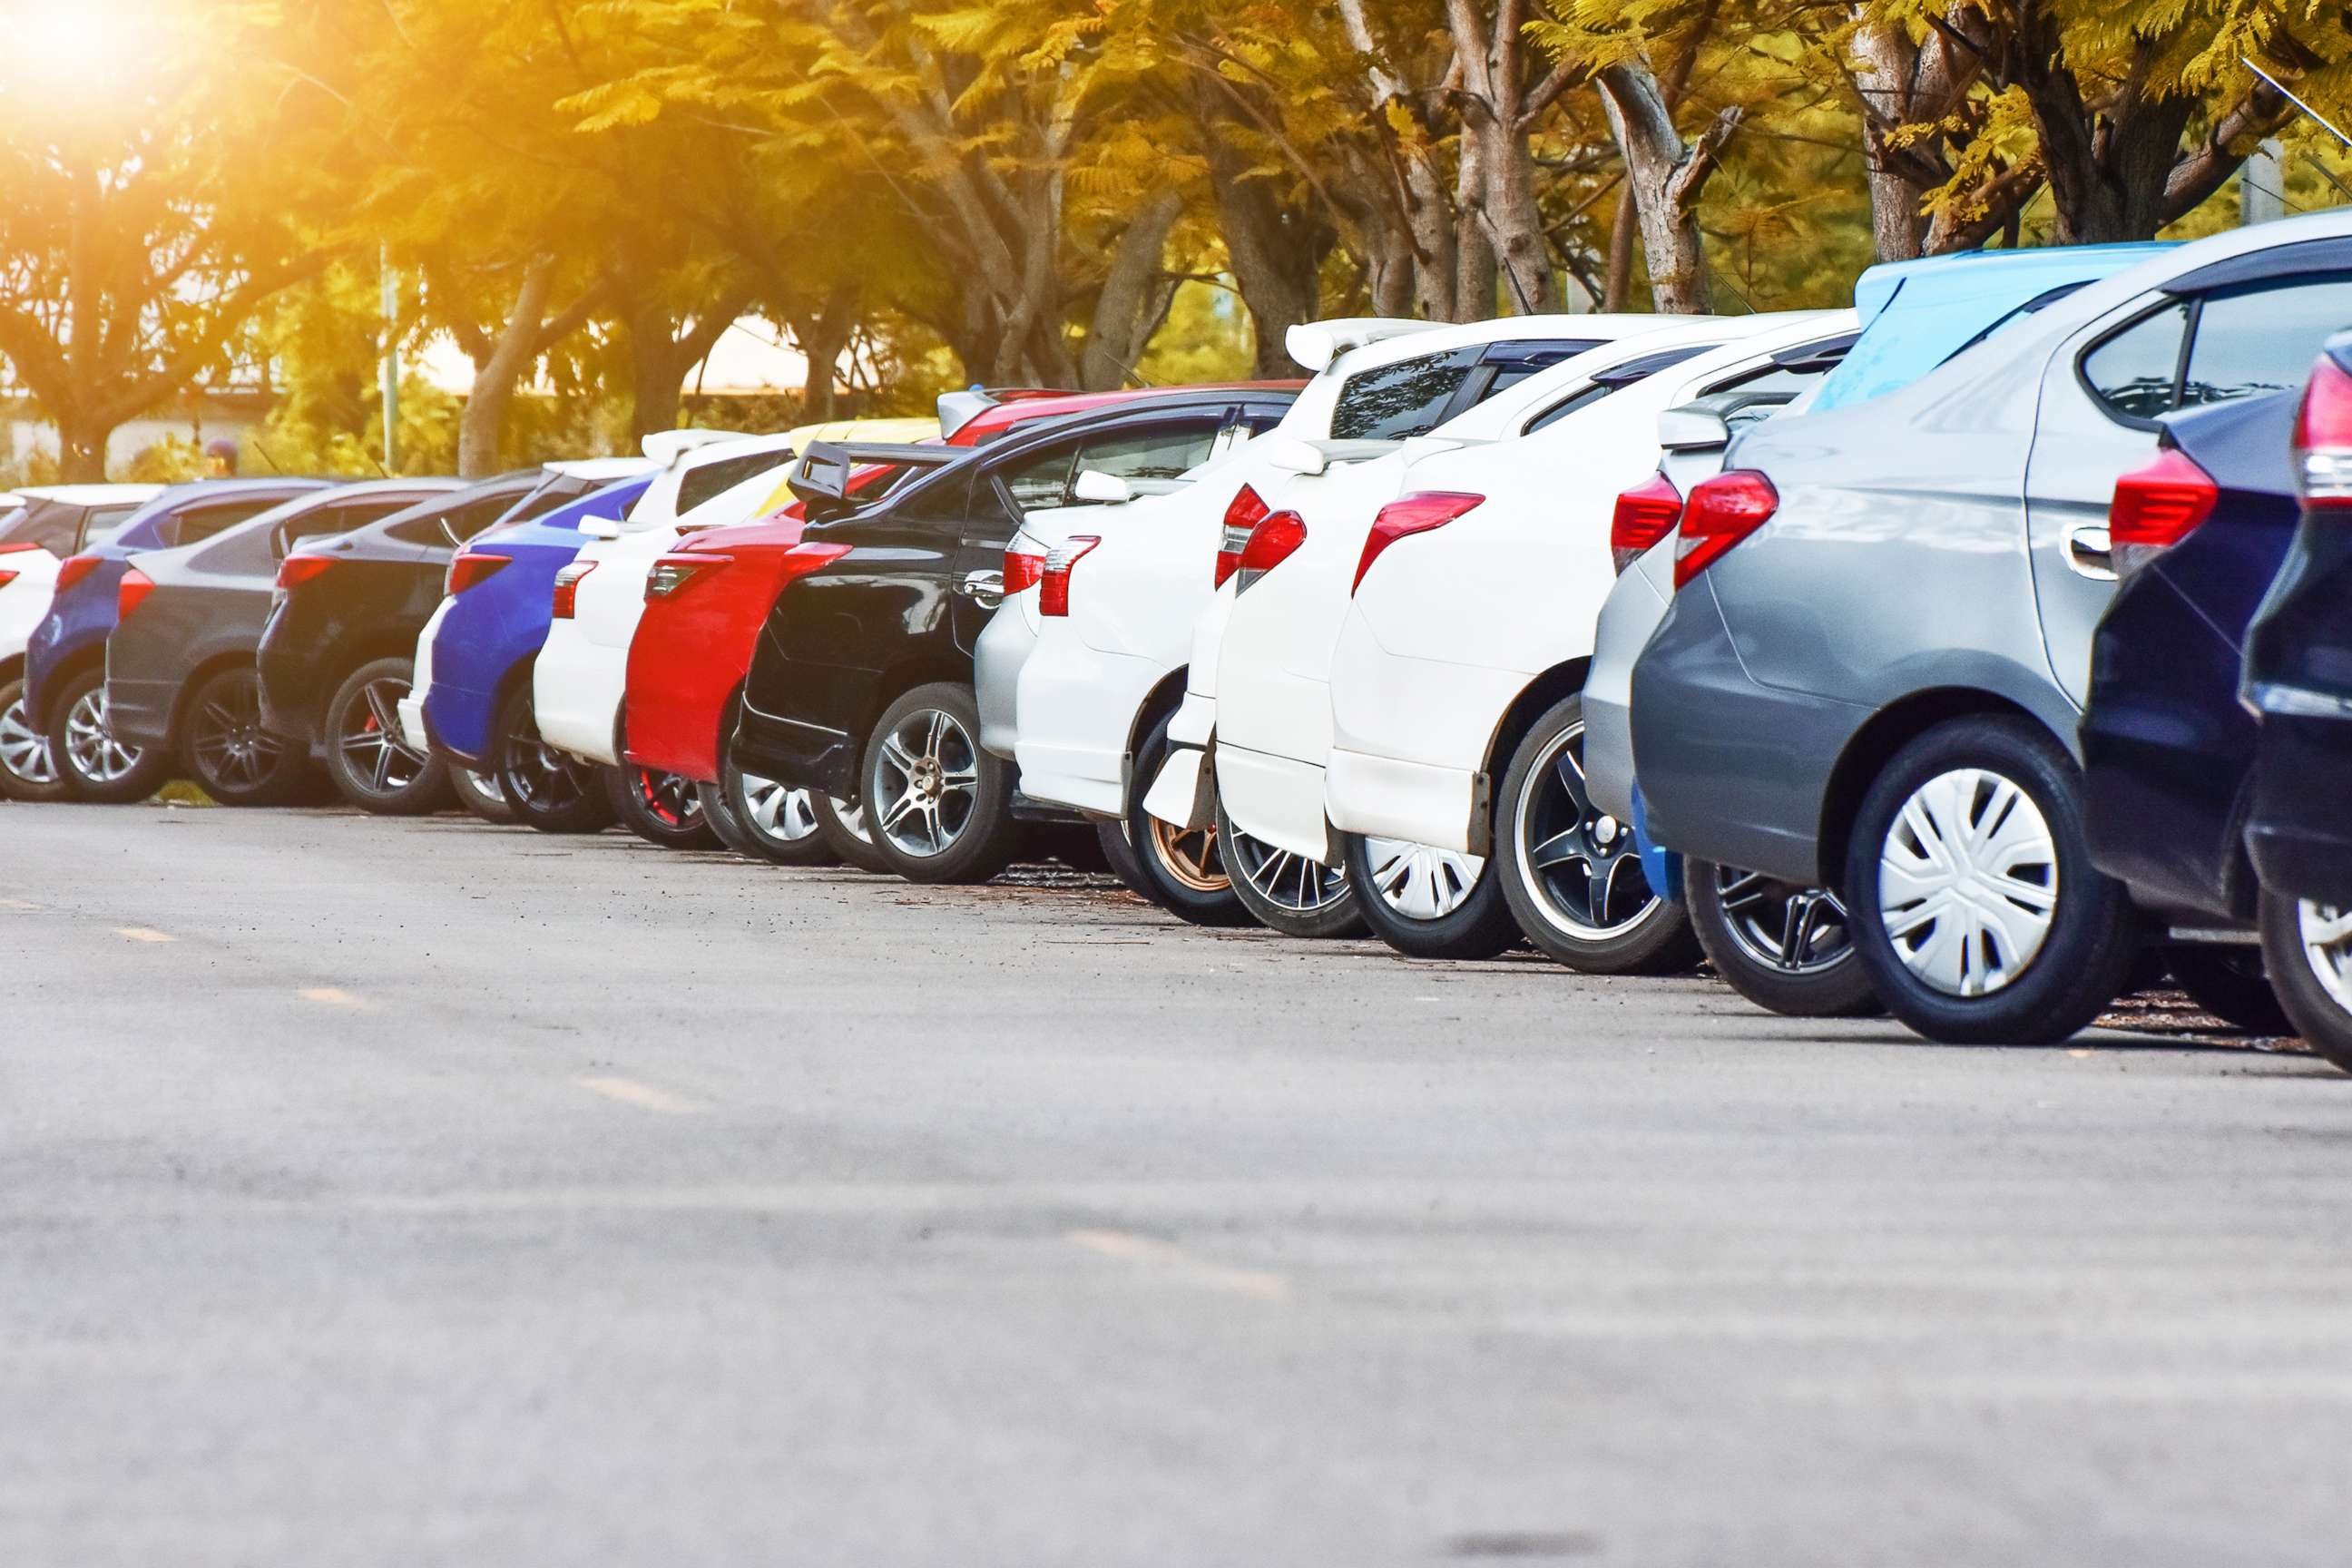 PHOTO: An undated stock photo shows cars parked outside in the sun.